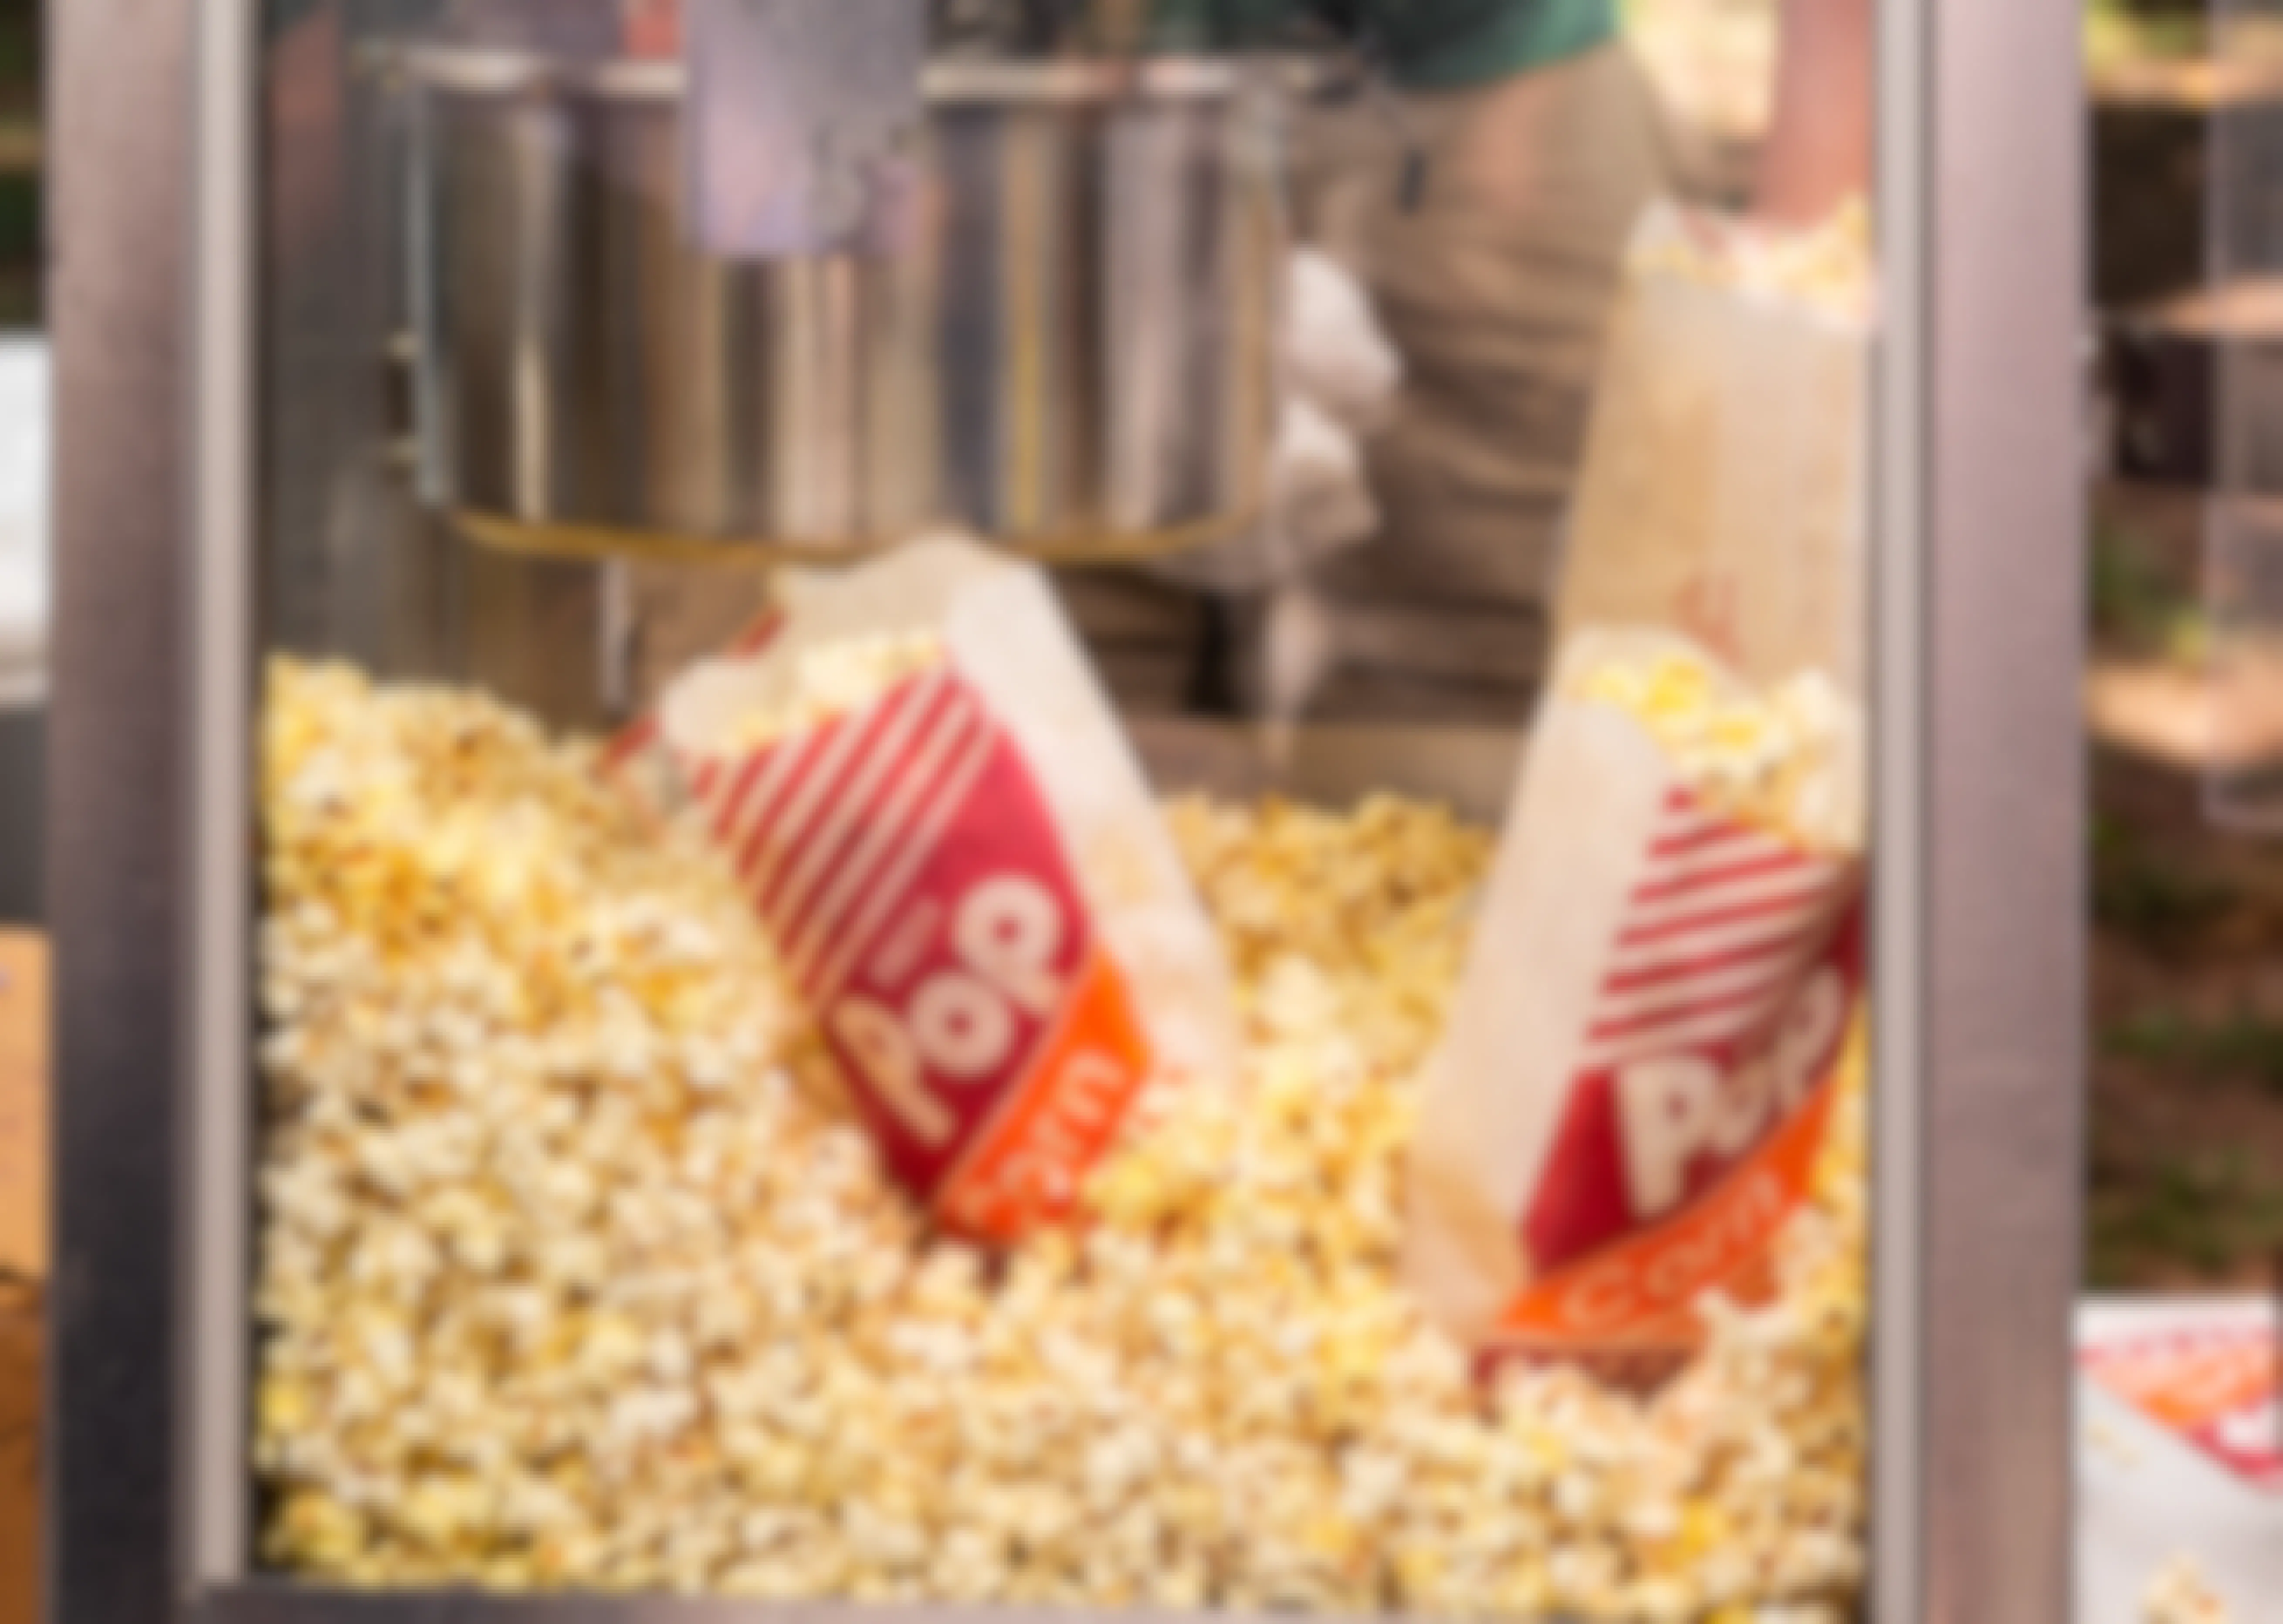 Two bags of popcorn displayed inside a popcorn machine.